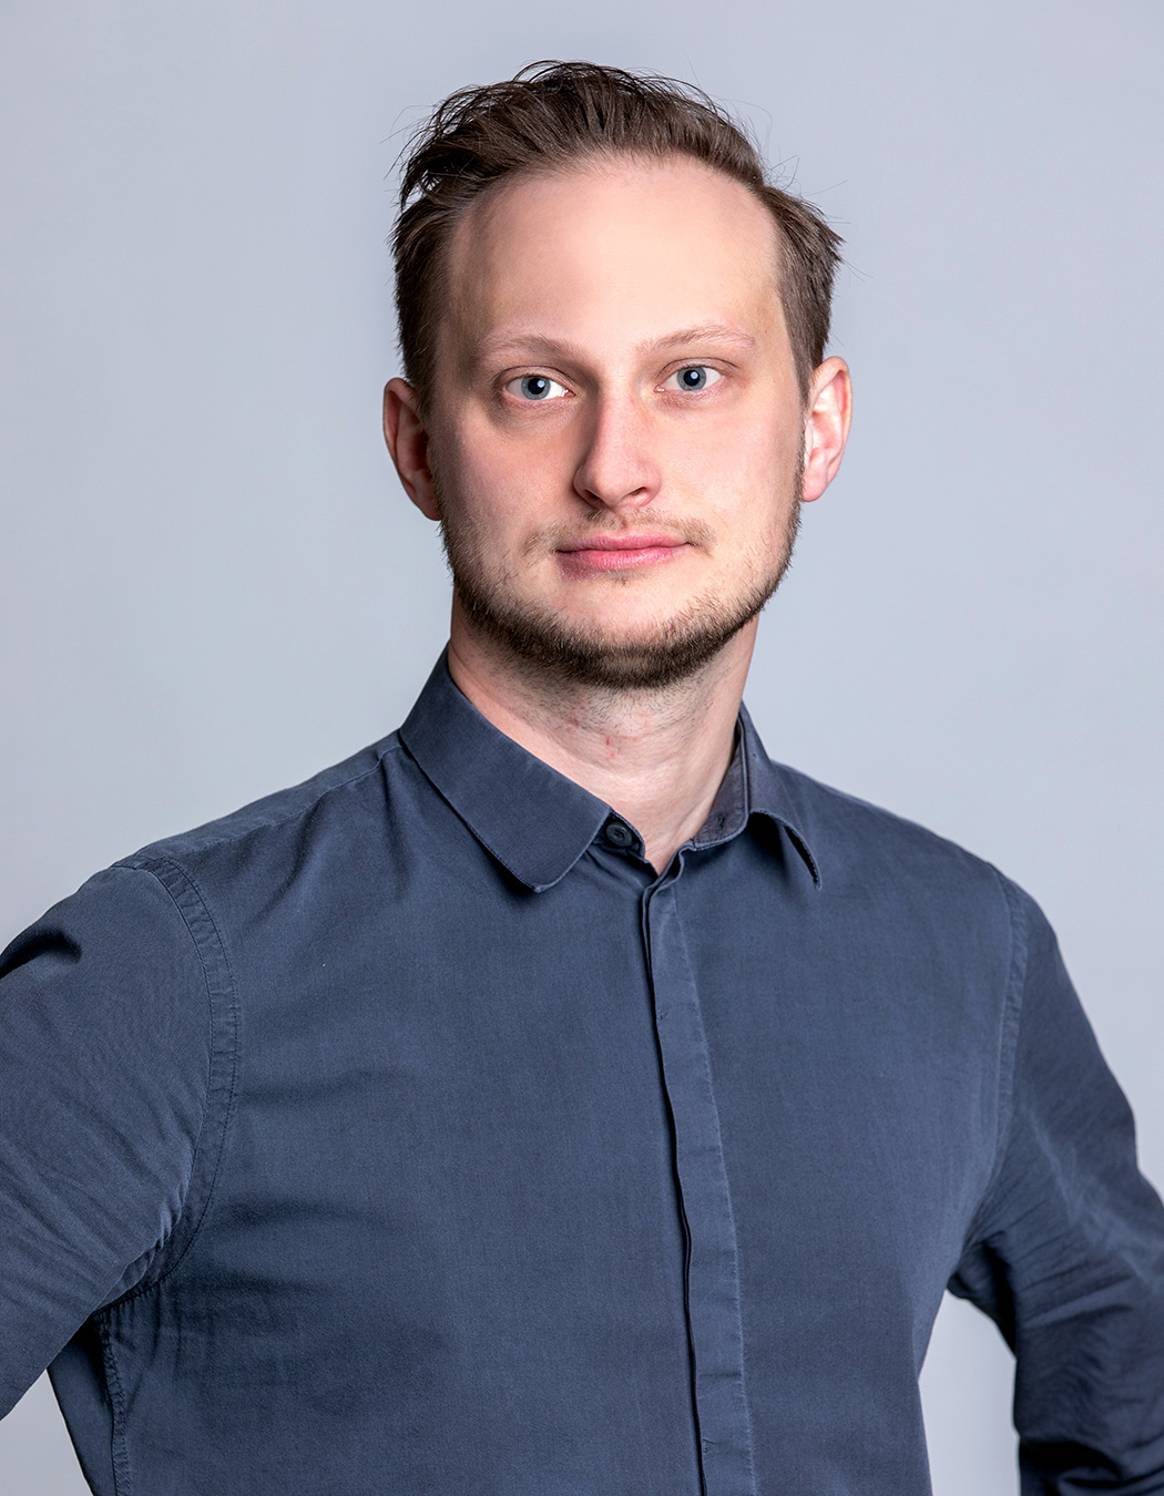 Martin Jensen, CEO and Co-Founder of Centra. Image: Centra